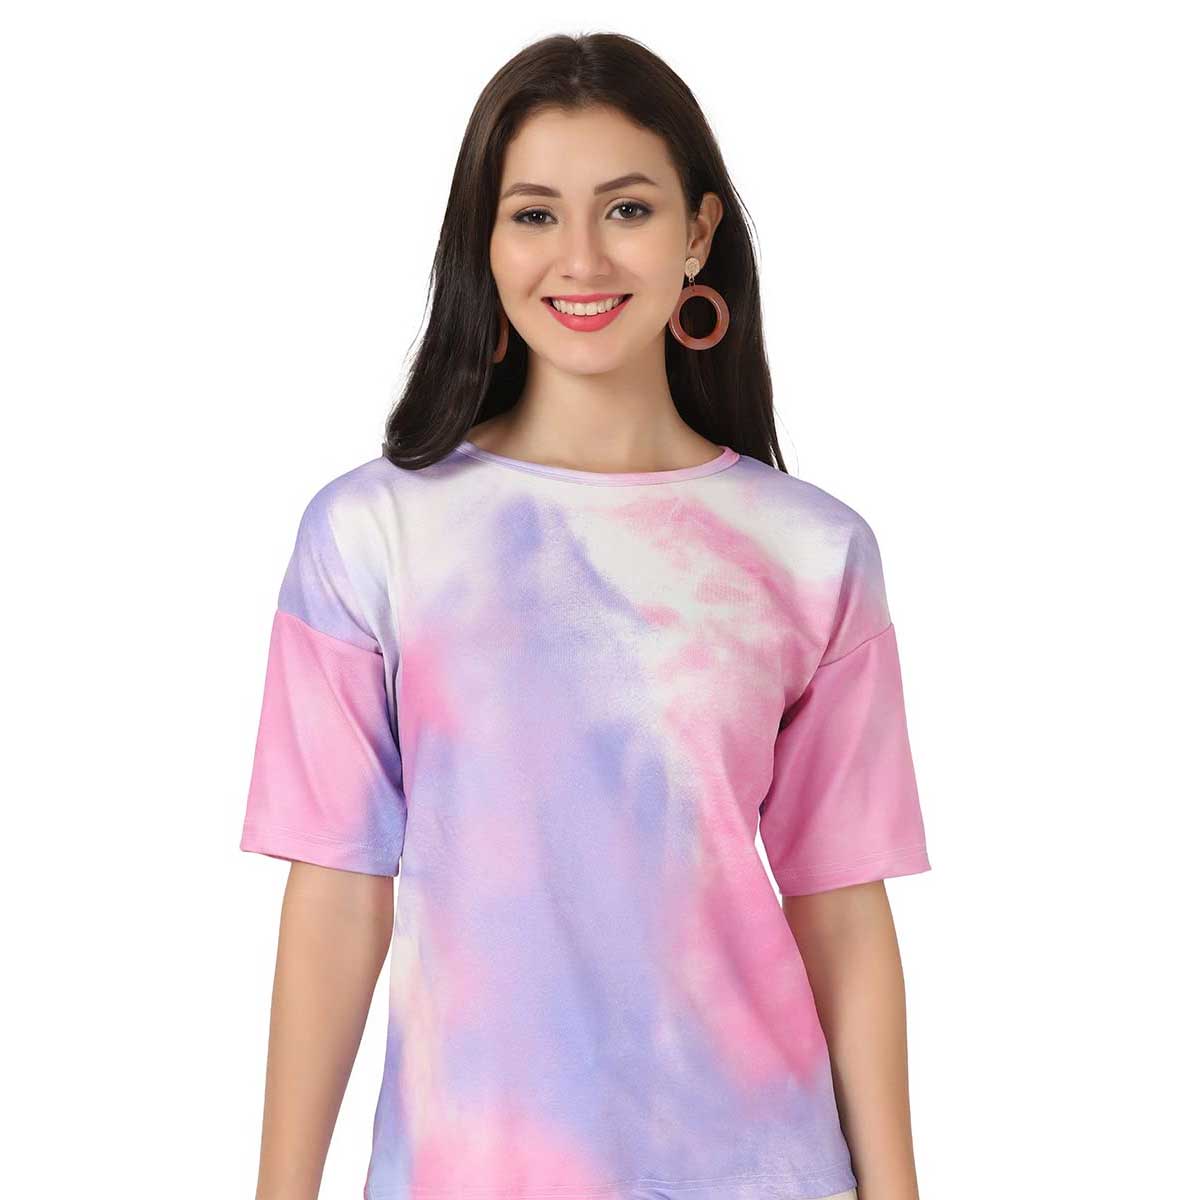 Tie Dye Tops Manufacturers in Abbotsford